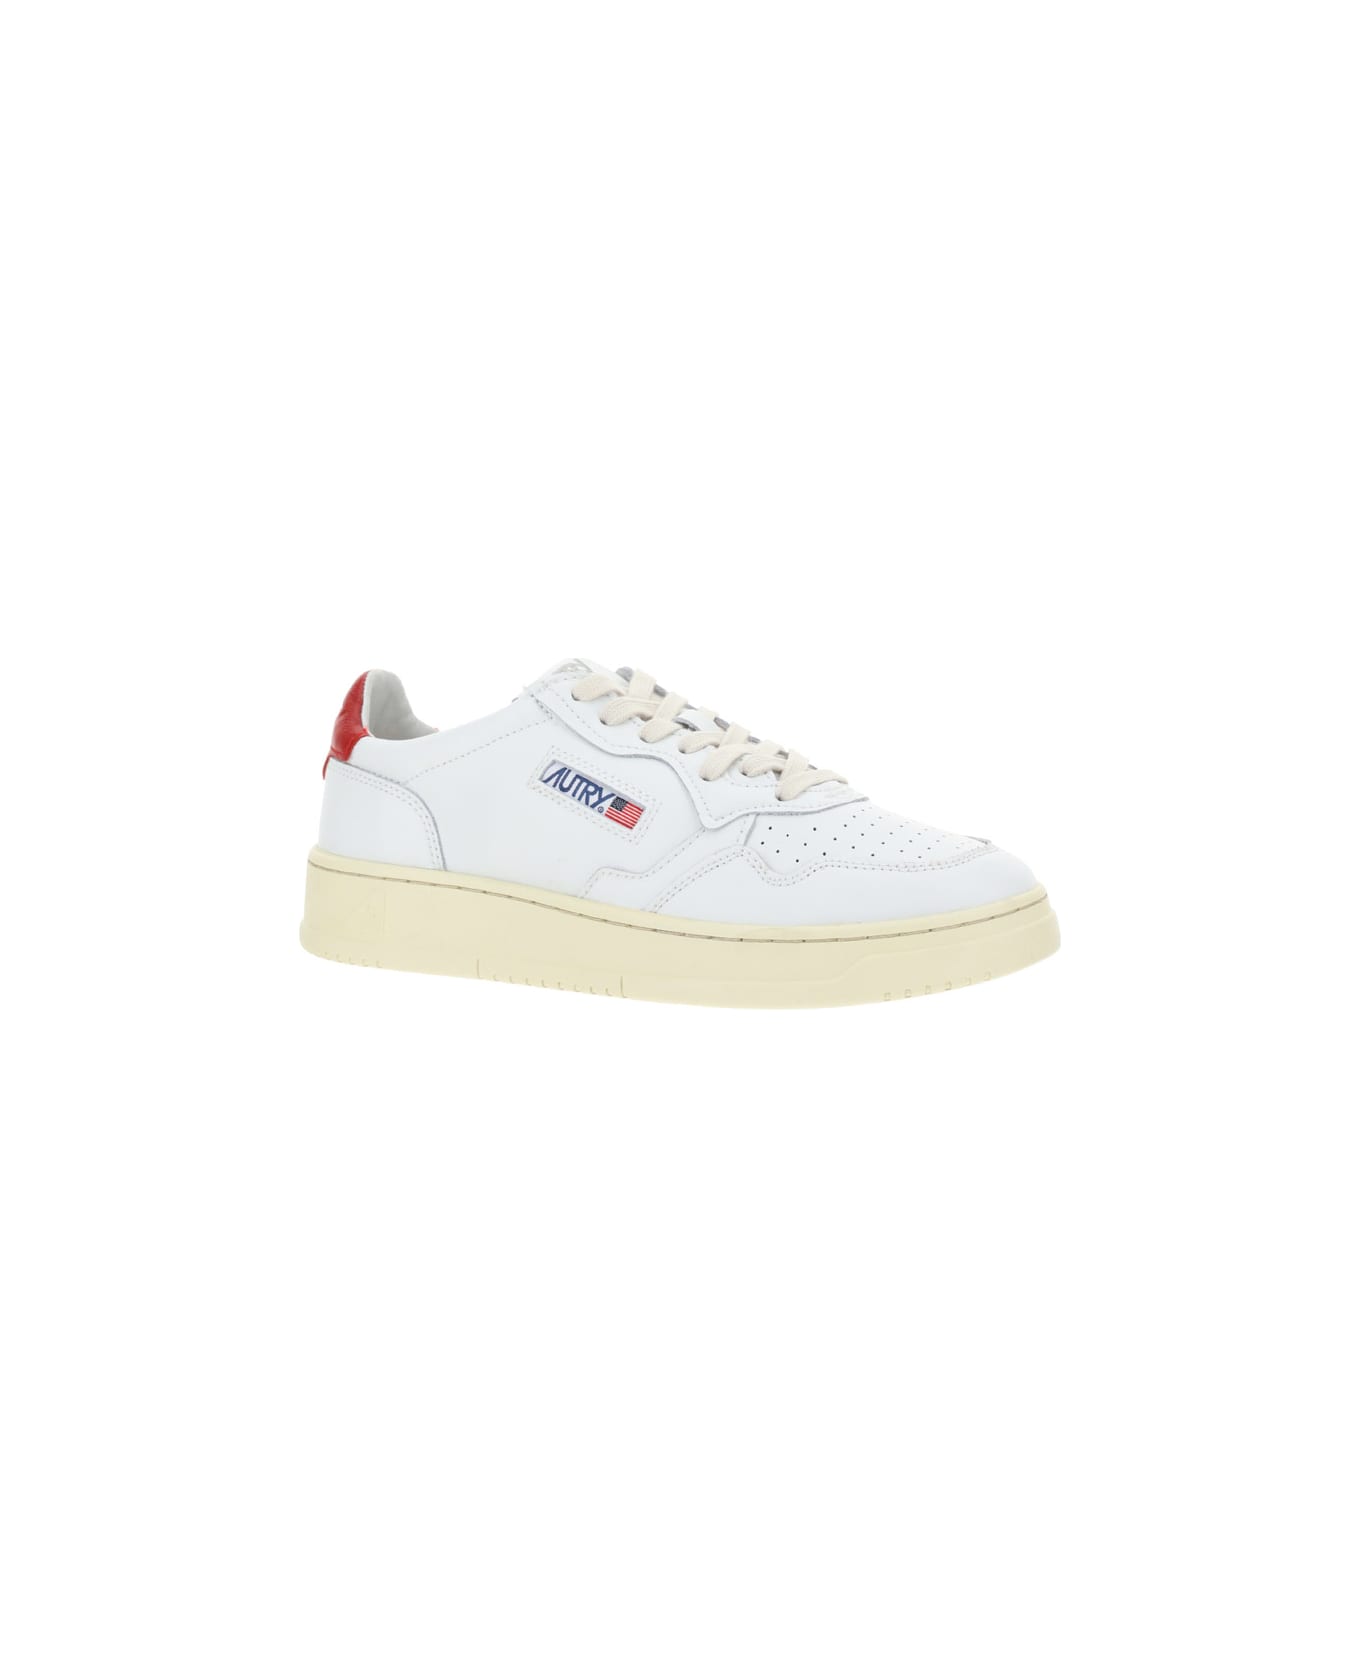 Autry Low 01 Sneakers - Wht/red スニーカー